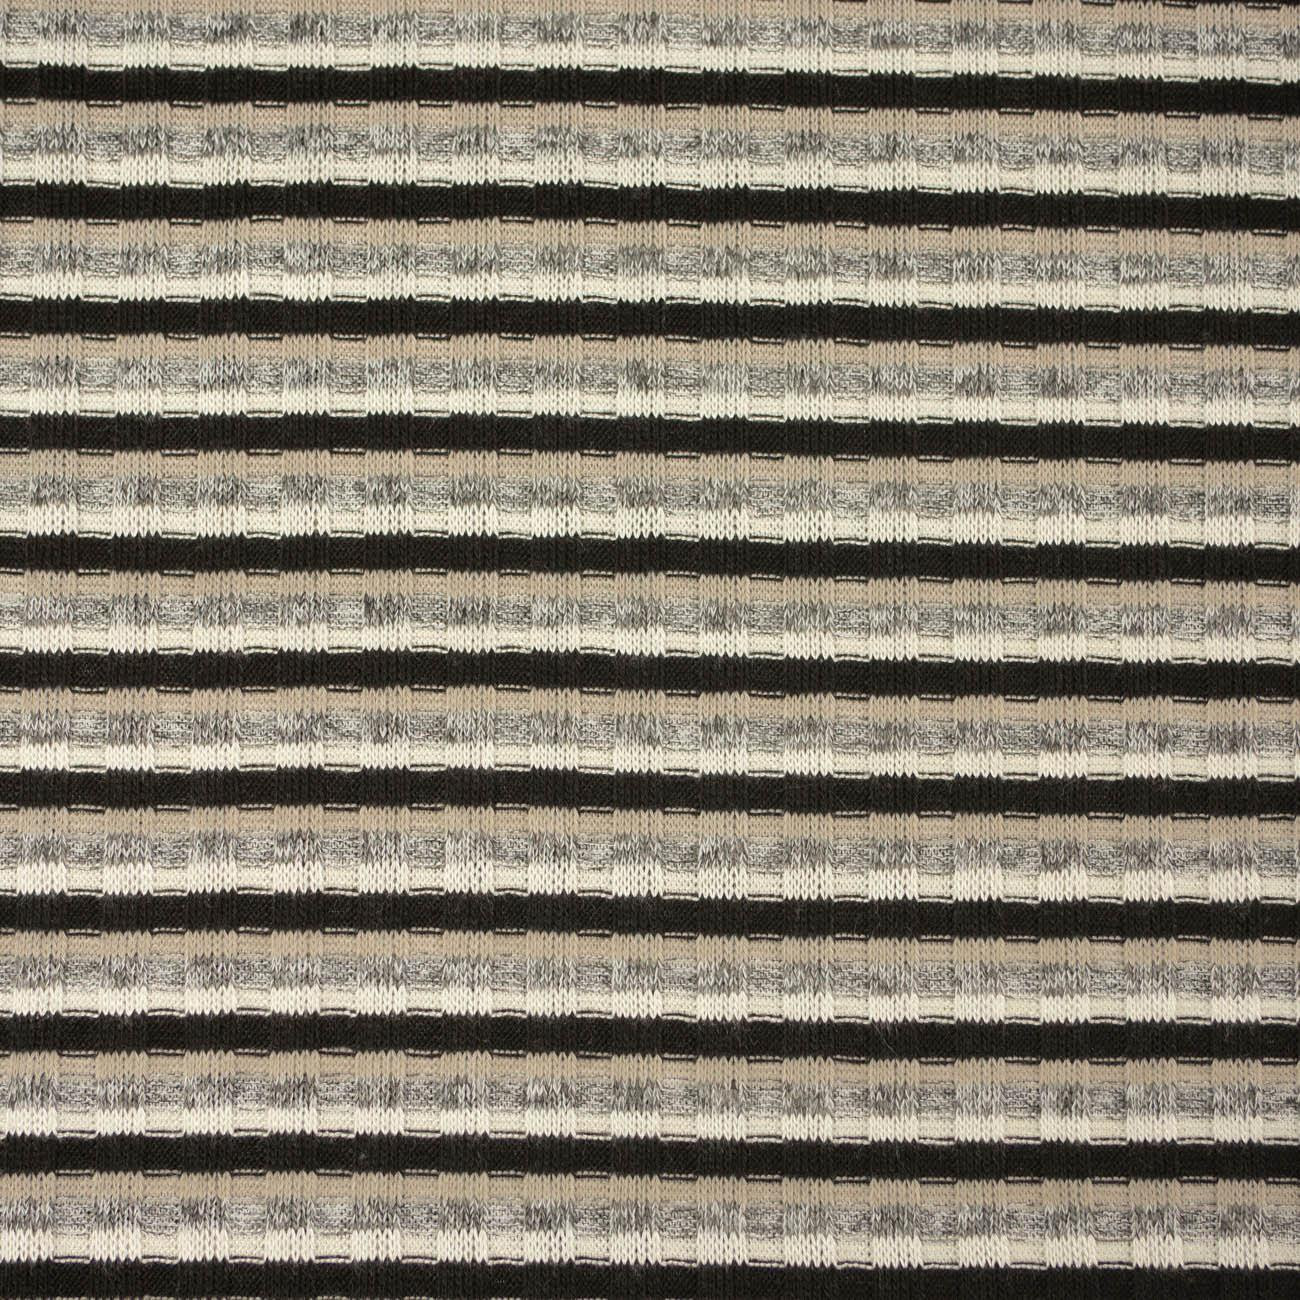 STRIPES / beige - Thin ribbed sweater knit fabric